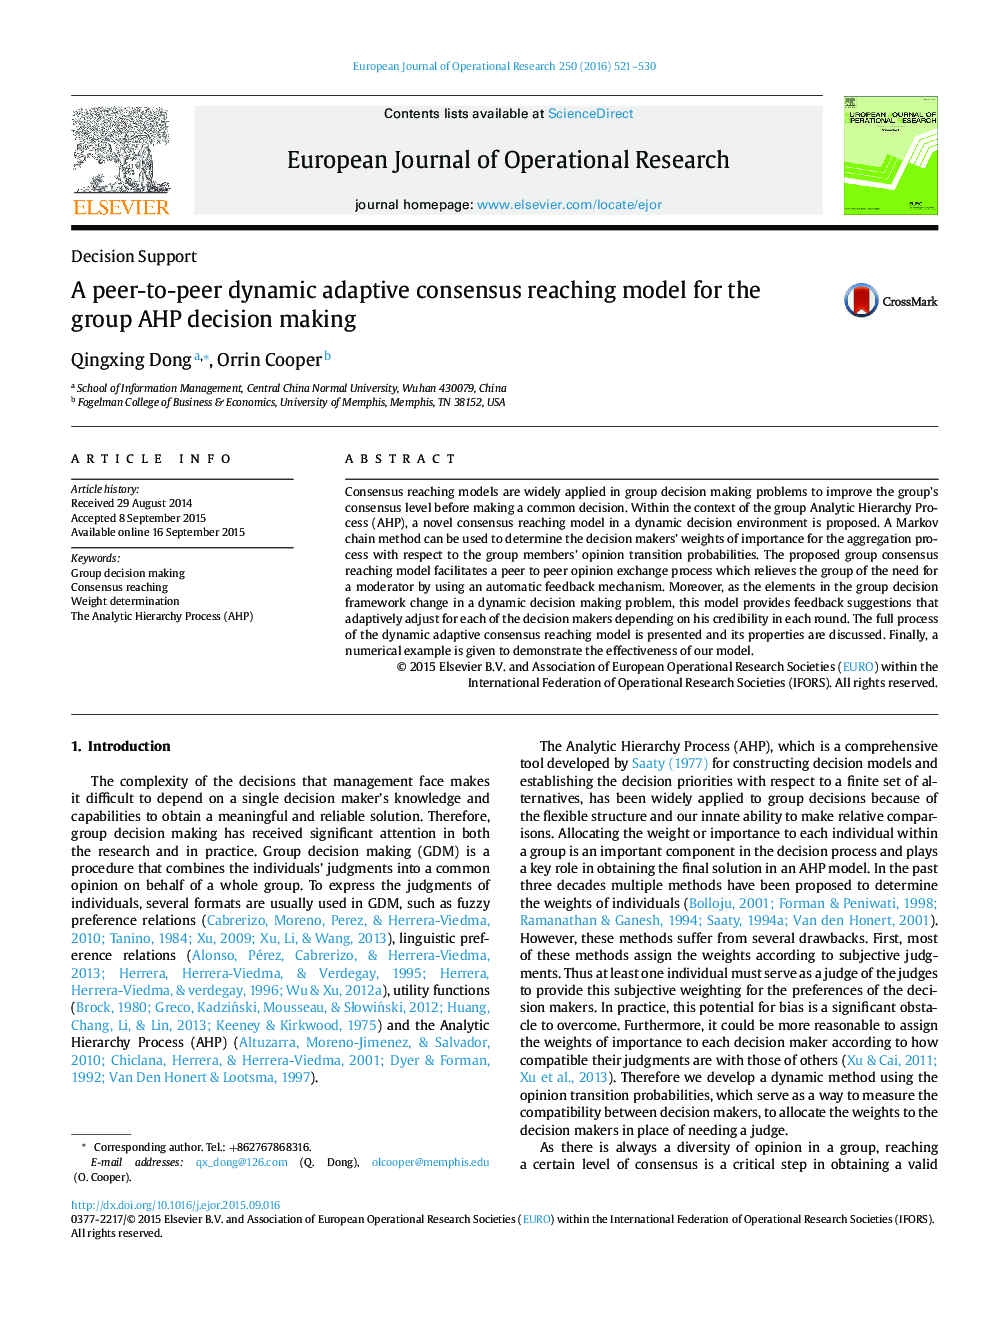 A peer-to-peer dynamic adaptive consensus reaching model for the group AHP decision making